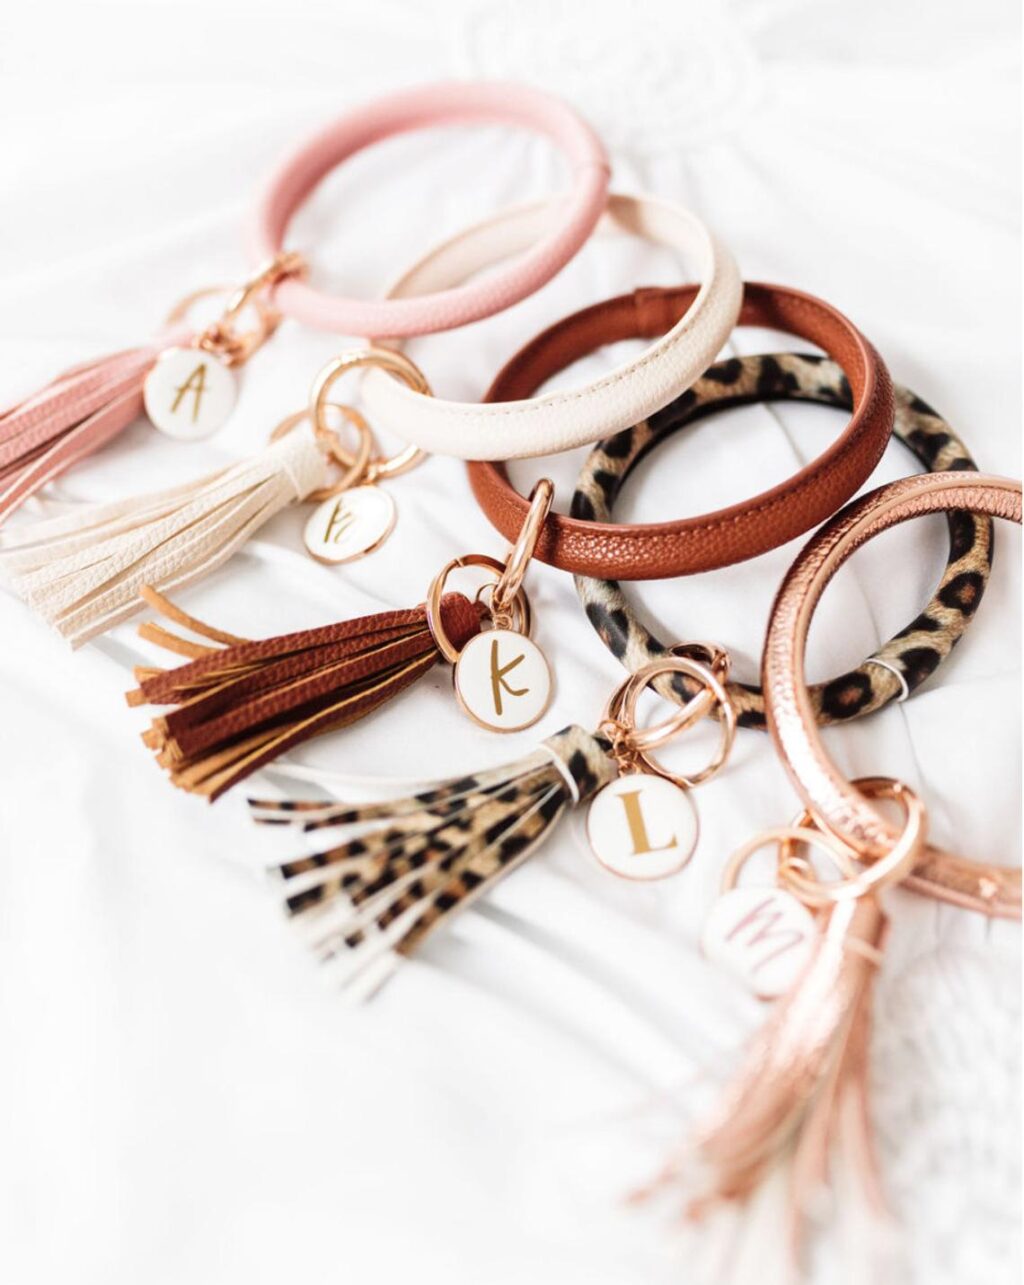 Key Ring Bangles as a Mother's Day Gift Idea